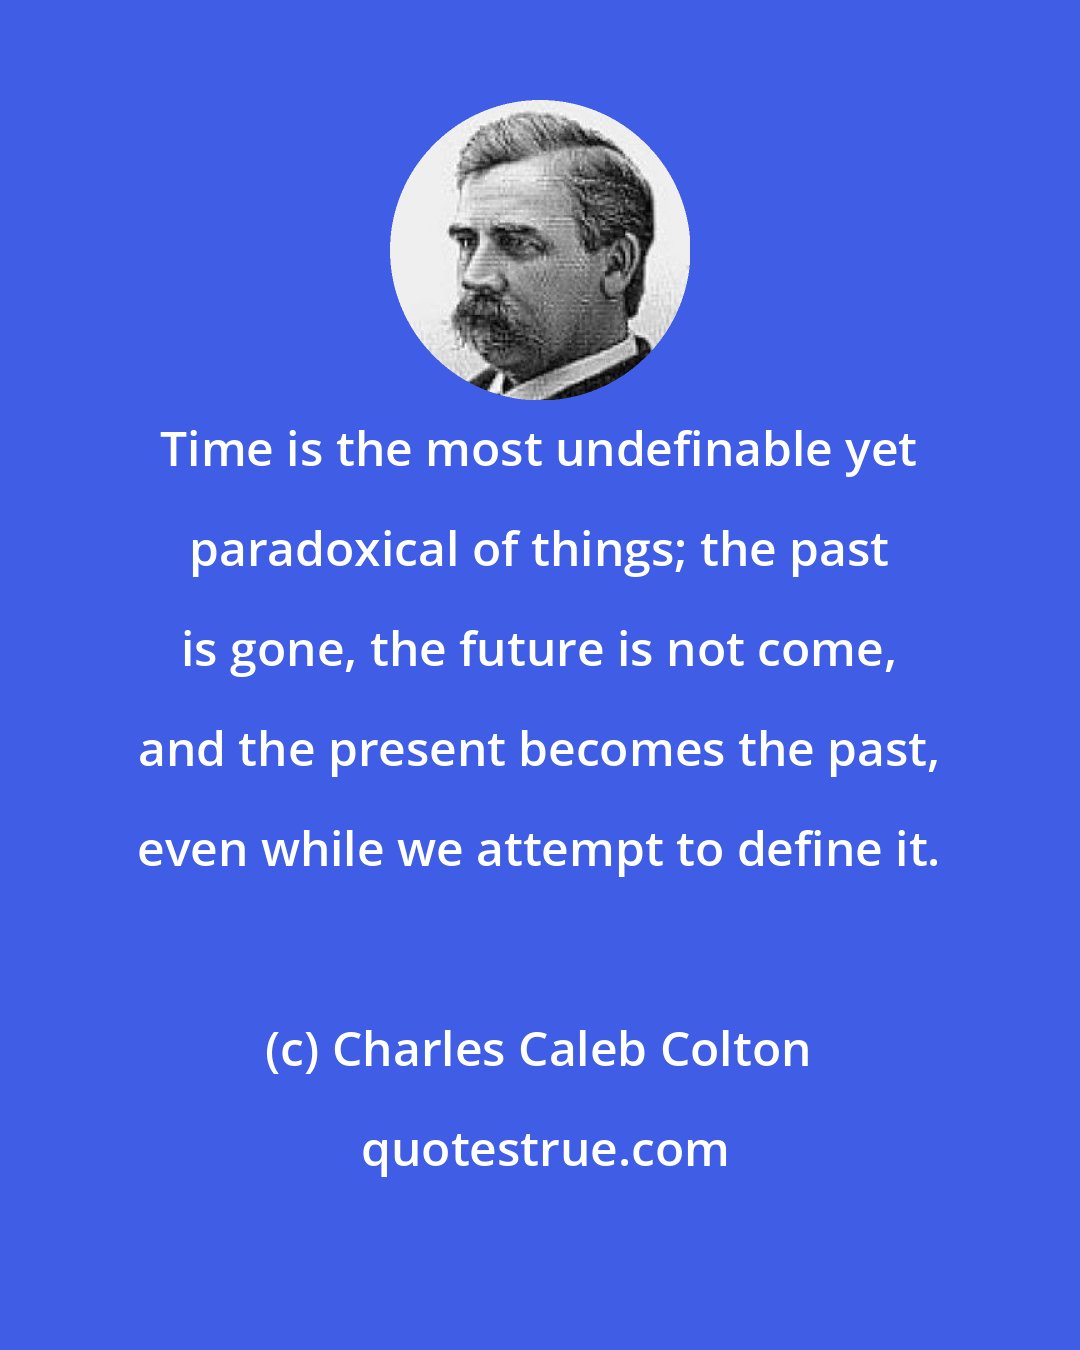 Charles Caleb Colton: Time is the most undefinable yet paradoxical of things; the past is gone, the future is not come, and the present becomes the past, even while we attempt to define it.